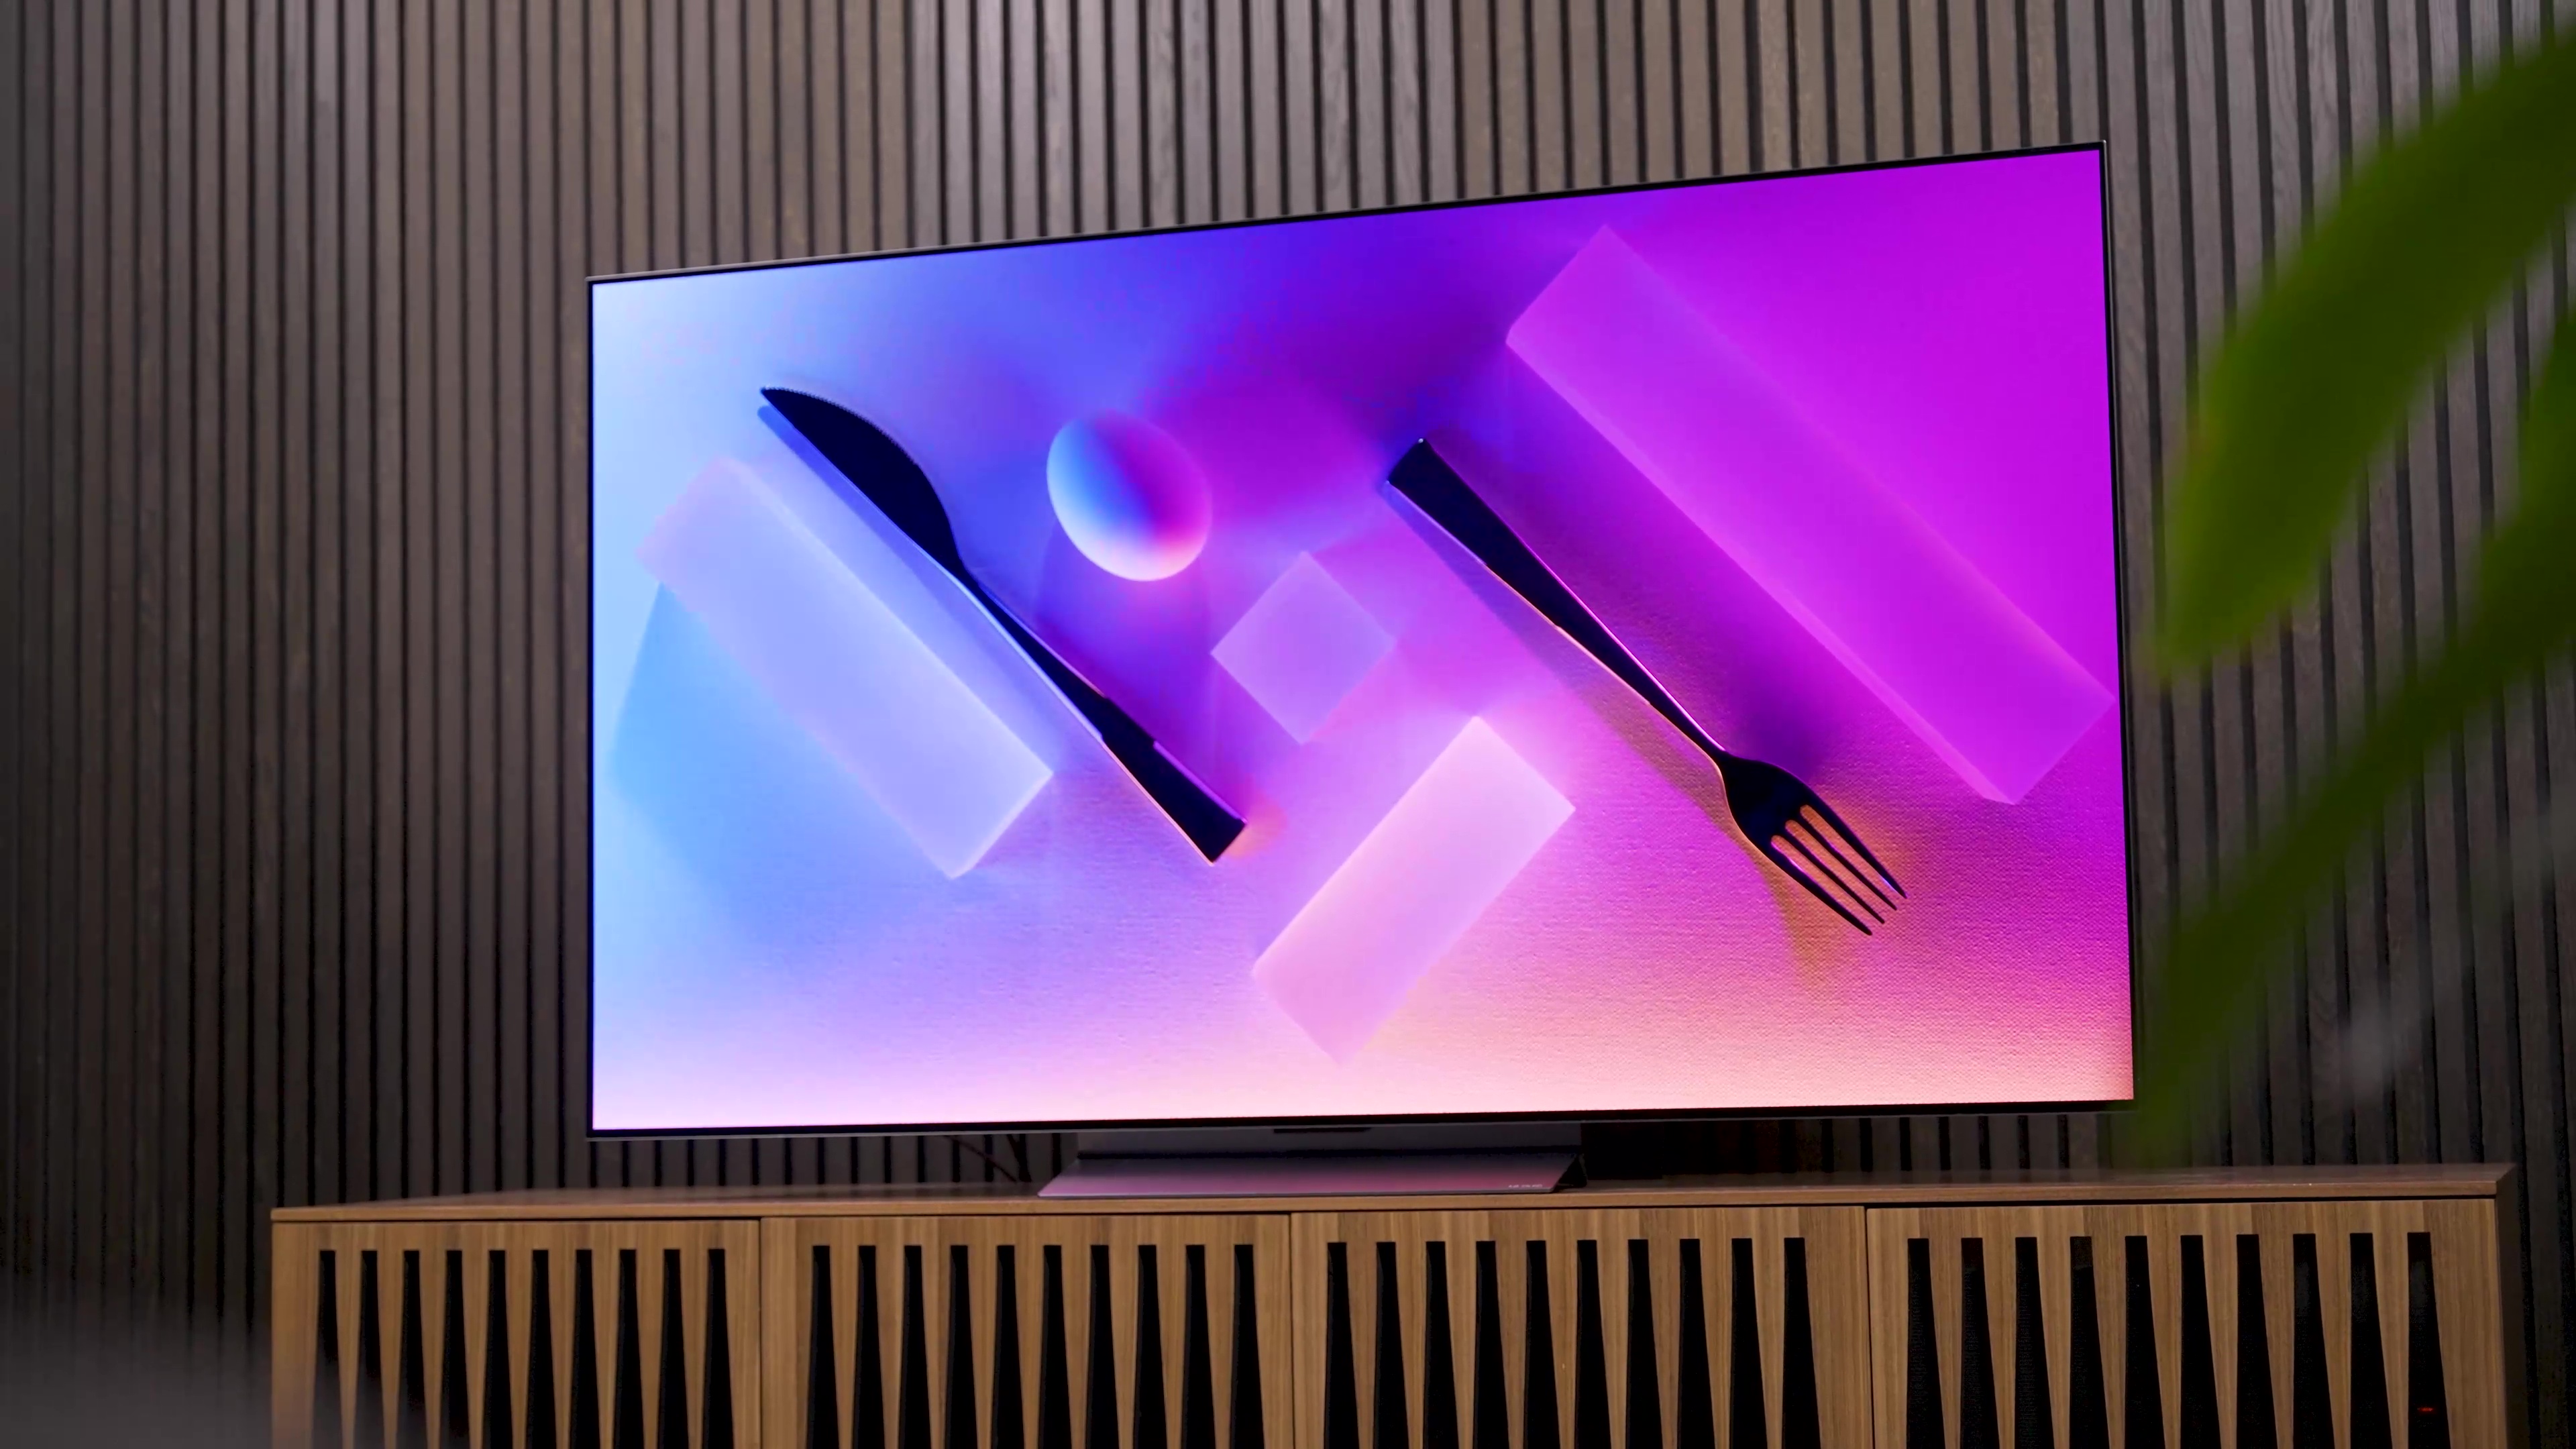 I tested an Ambilight OLED TV and it made me feel like a kid at